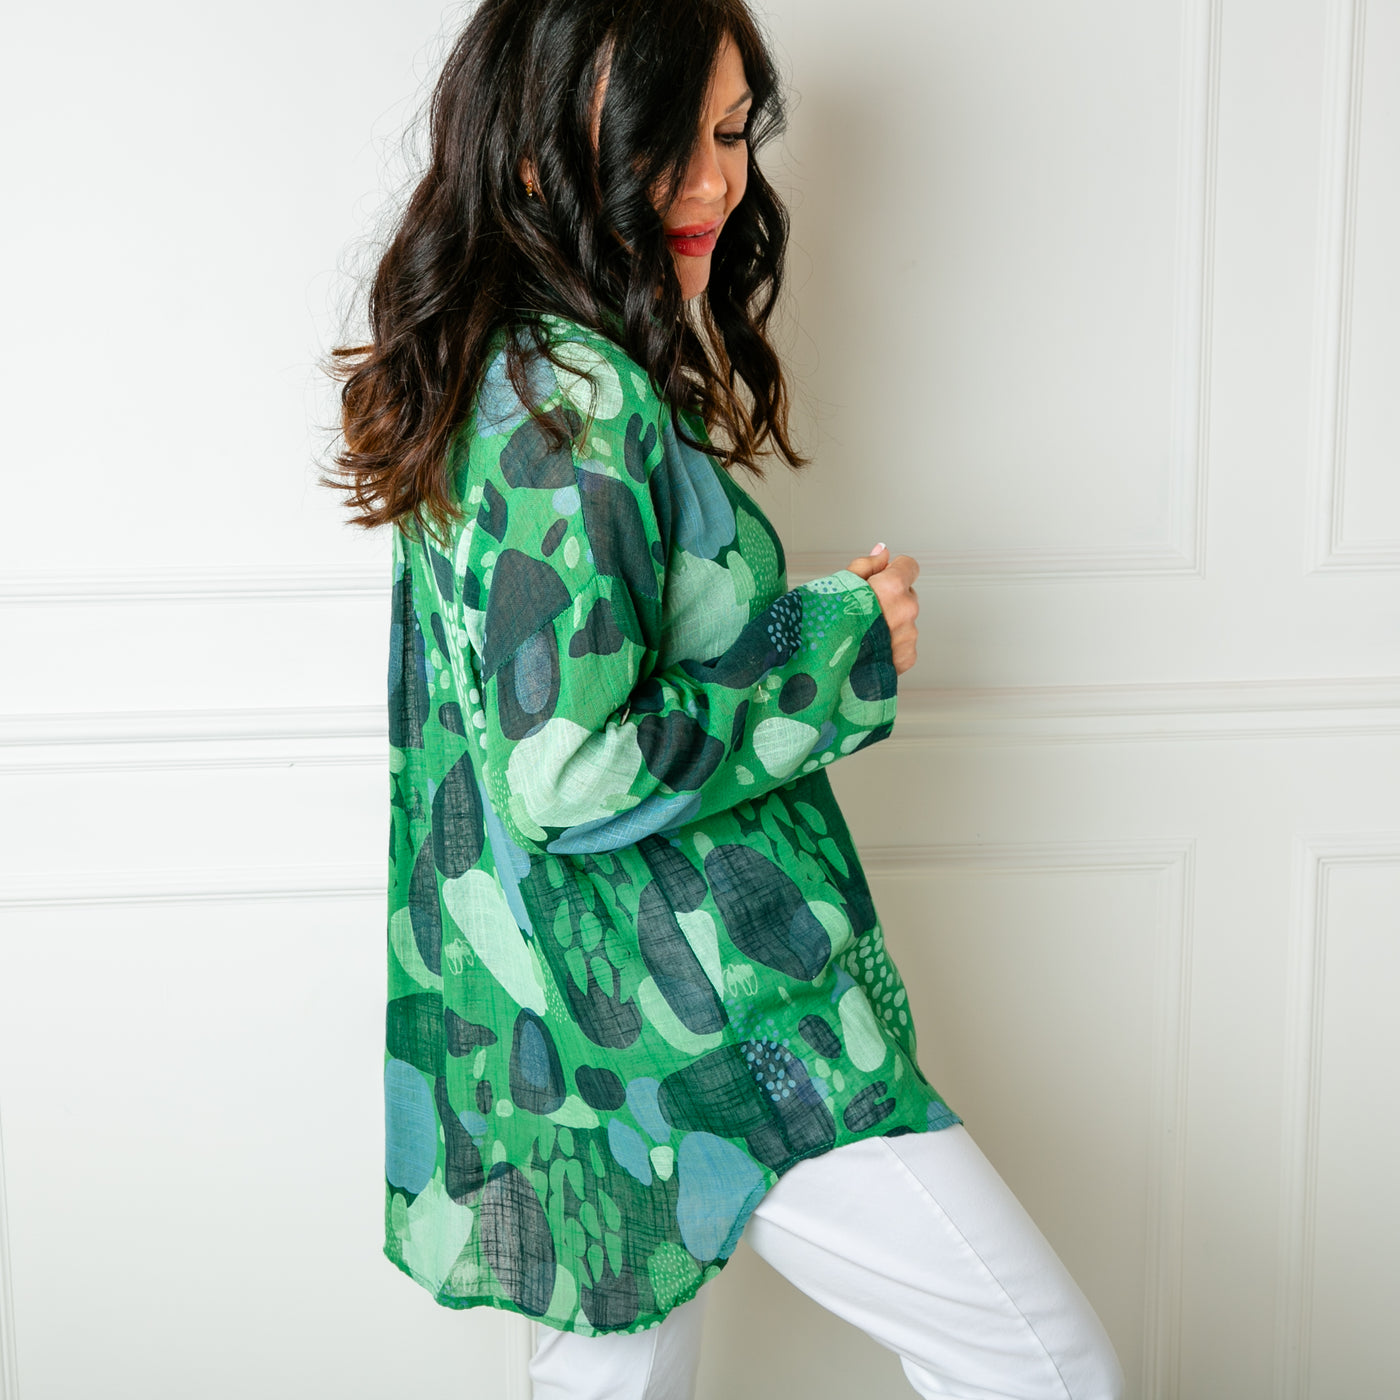 The Cotton Spot Print Shirt in green with a traditional shirt collar and buttons down the front